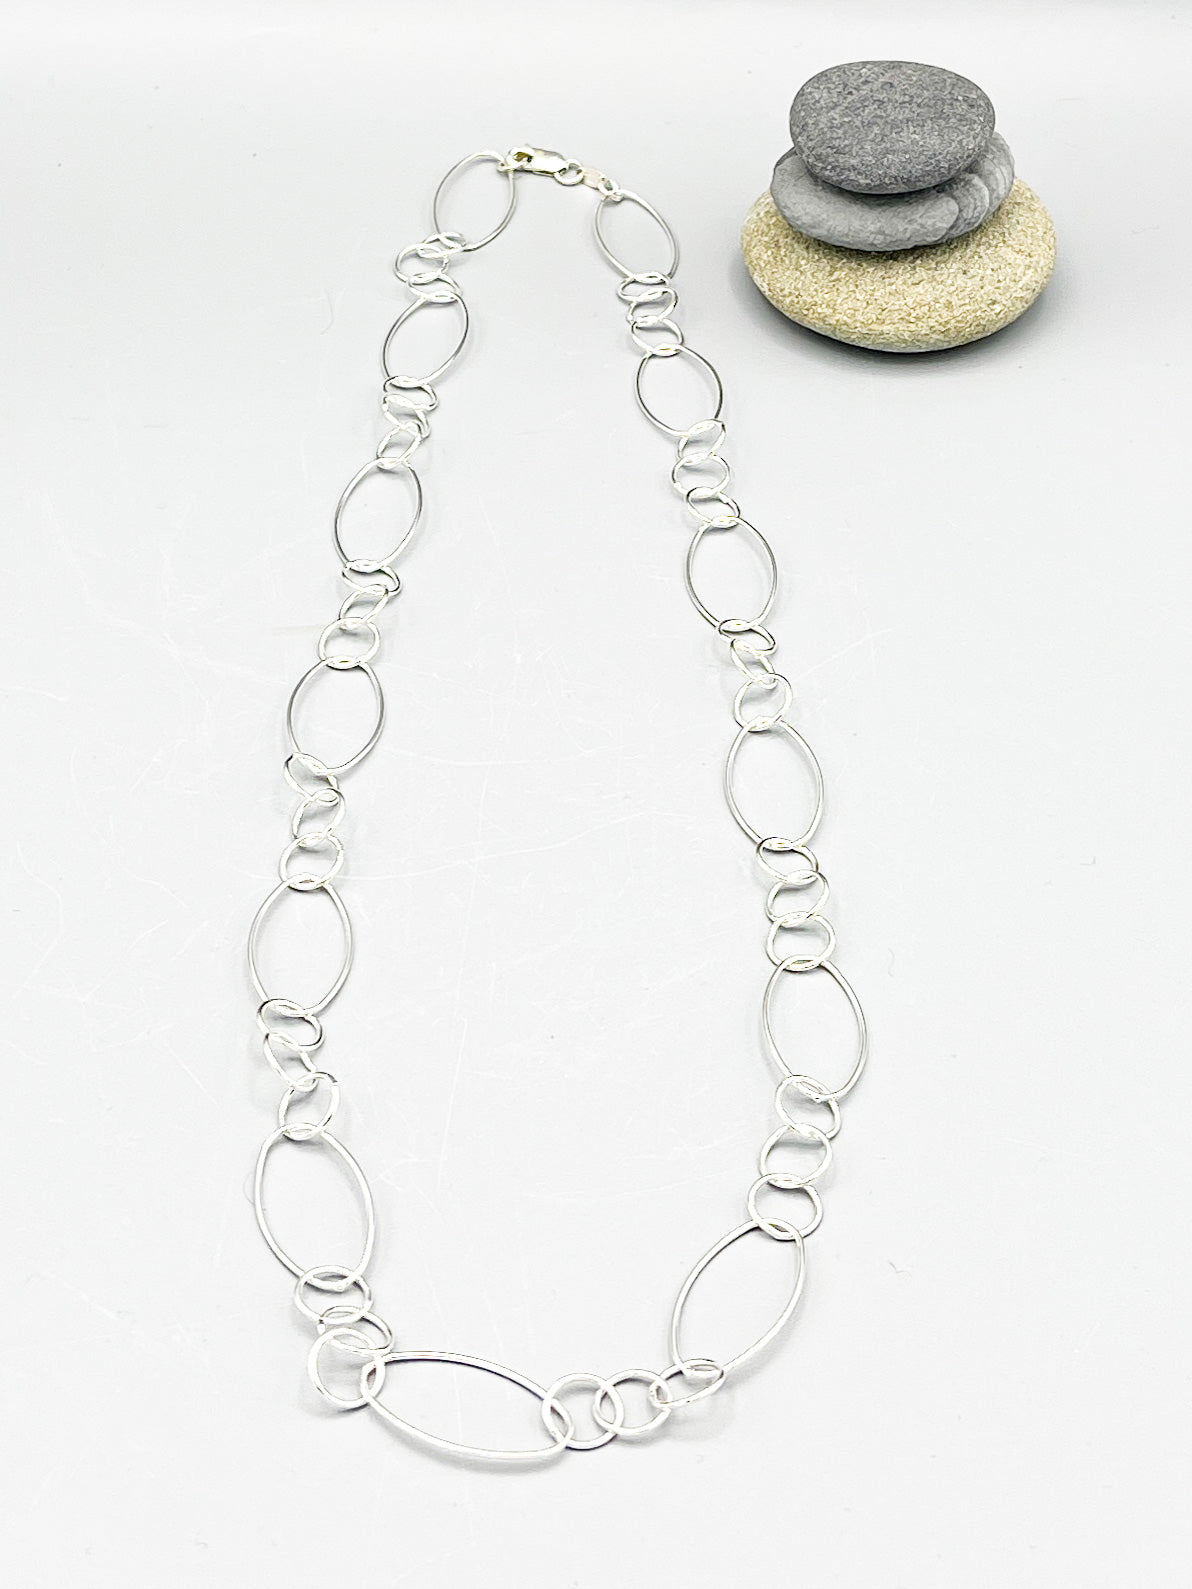 Sterling Silver Necklace. 26” long polished round ring necklace